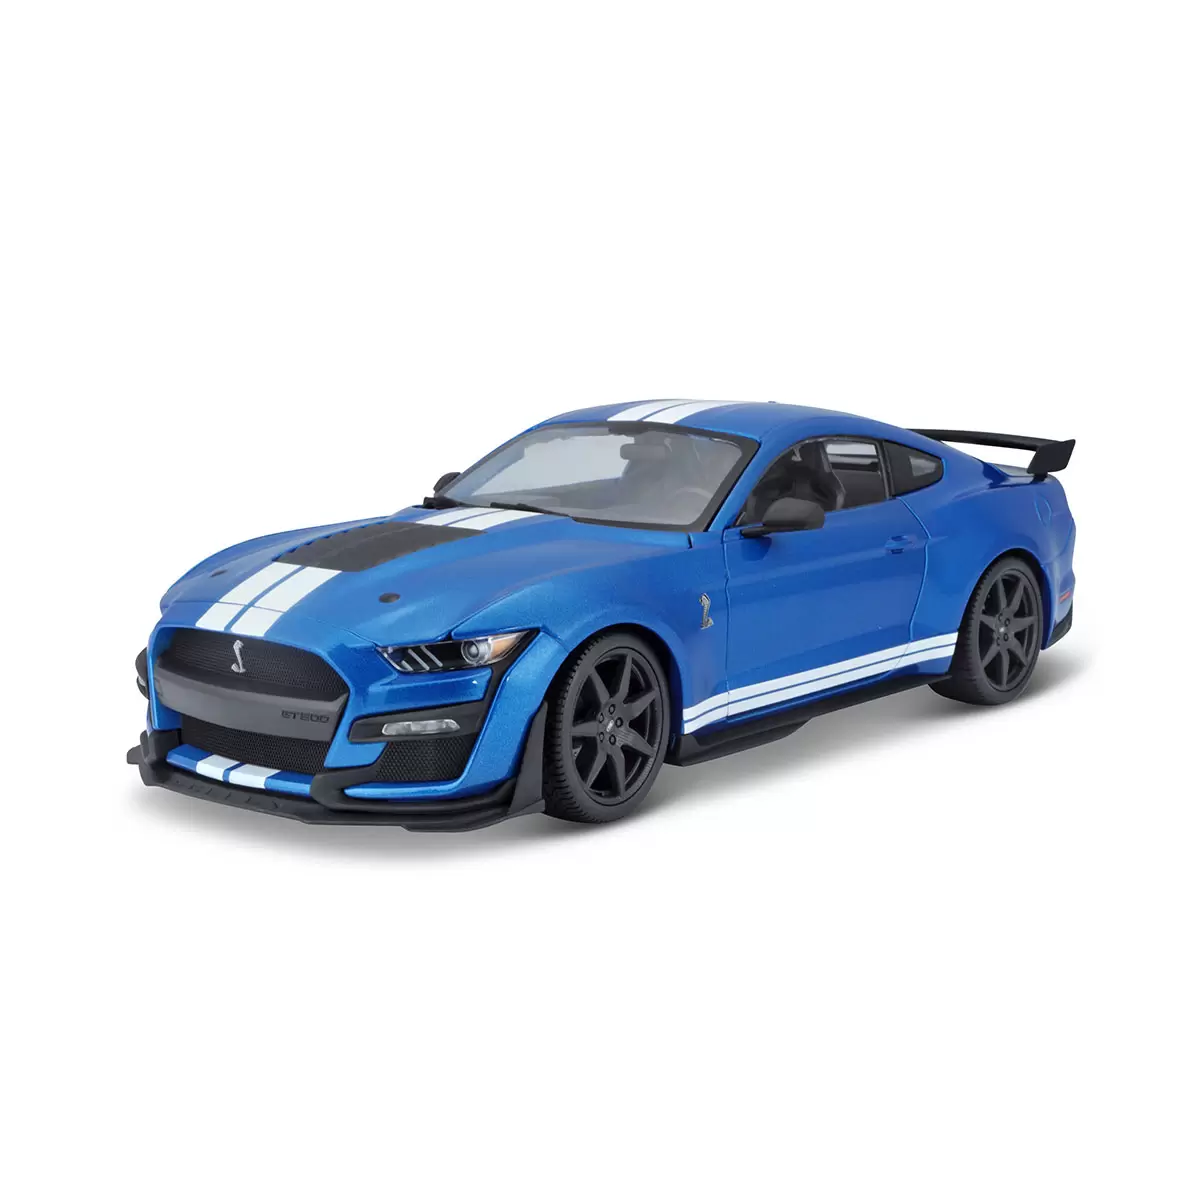 Maisto 1:18 Scale Highly Detailed Die Cast Vehicles: 2020 Mustang Shelby GT500 & 1967 Ford Mustang GTA Fastback - 2 Pack (3+ Years)